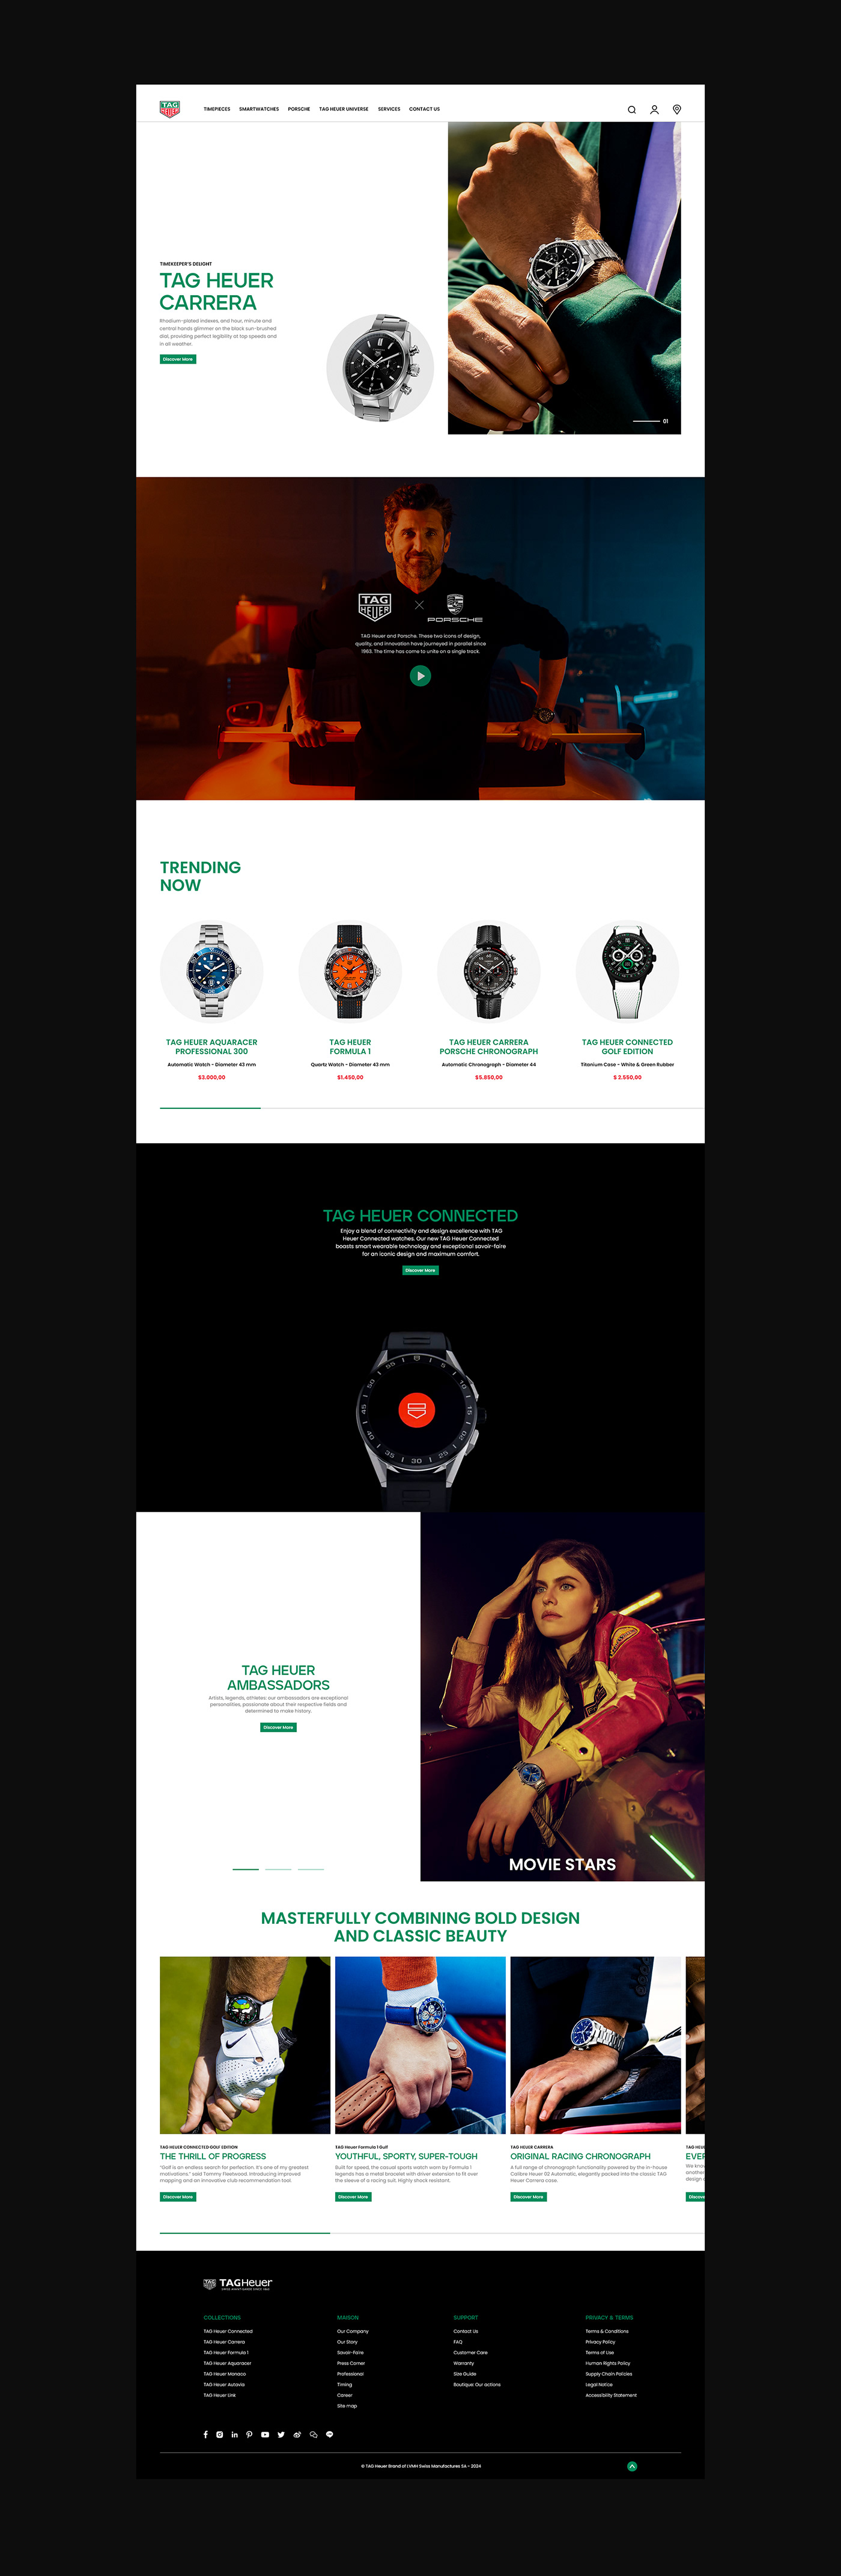 UI/UX UI ui design ux UX design Web Design  Website watch user interface tag heuer